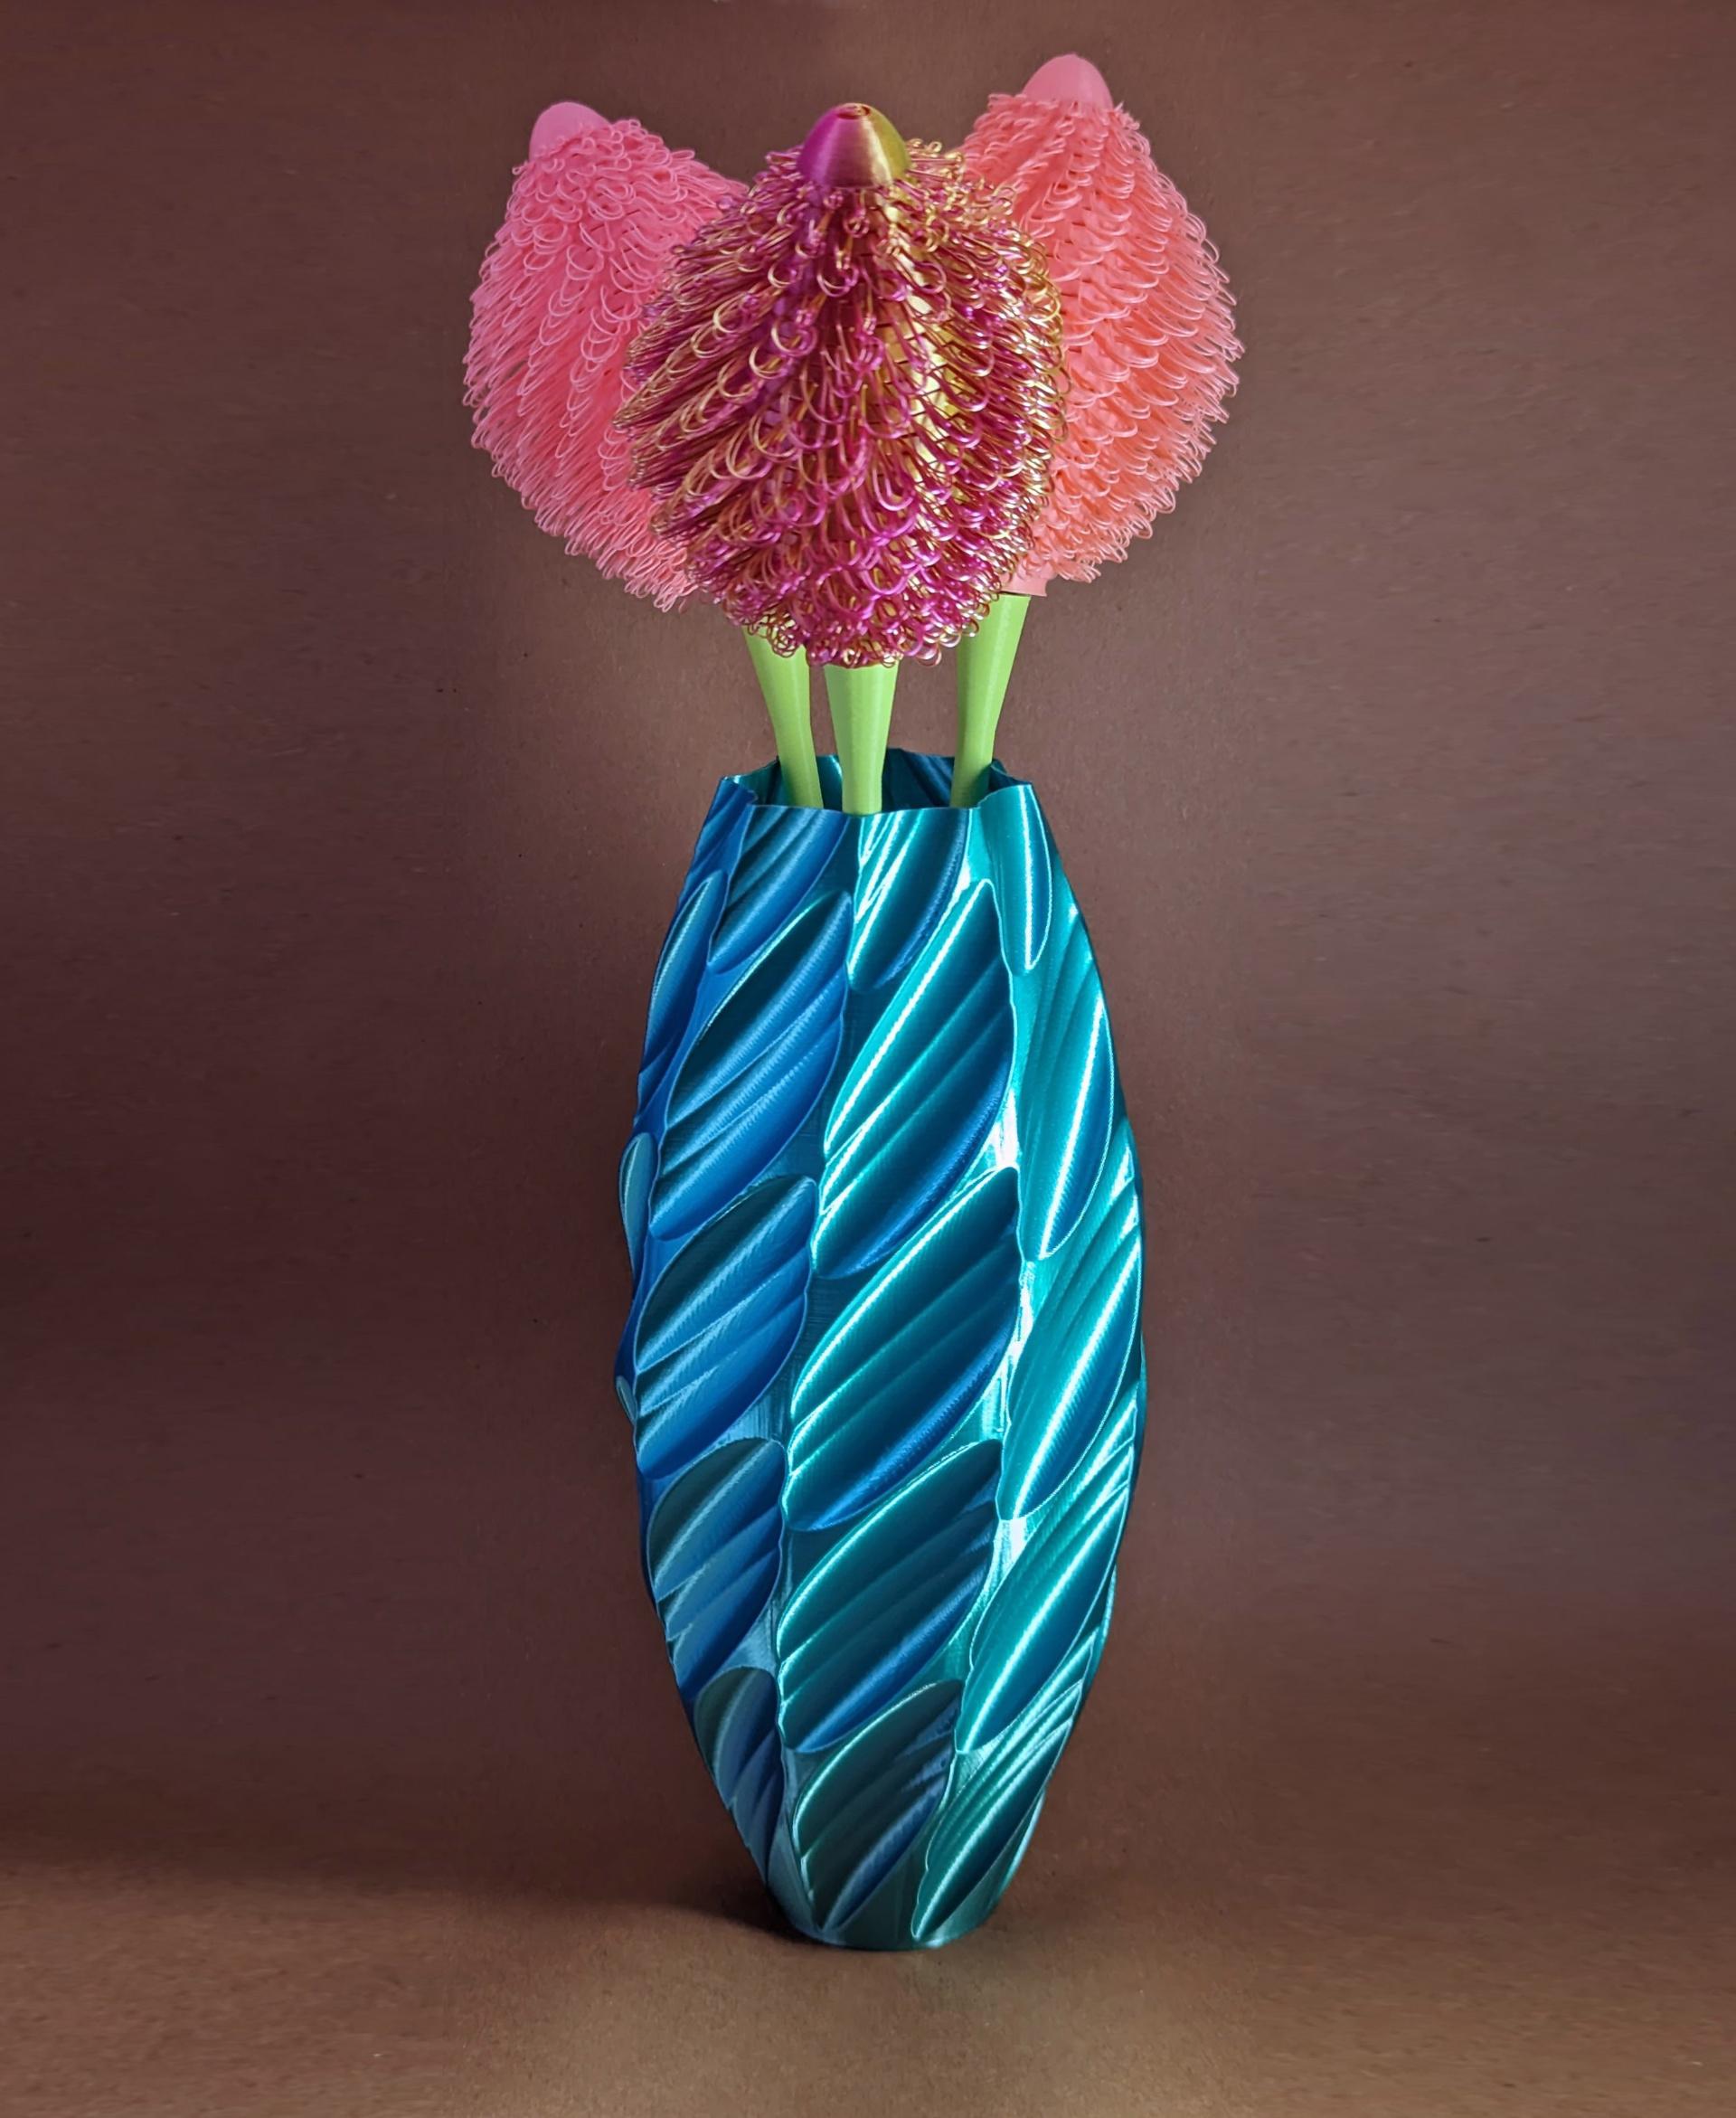 Swirling Leaves Vase - Printed in Polymaker Dual Silk Caribbean, shown with 3dprintbunny thistle flowers - 3d model